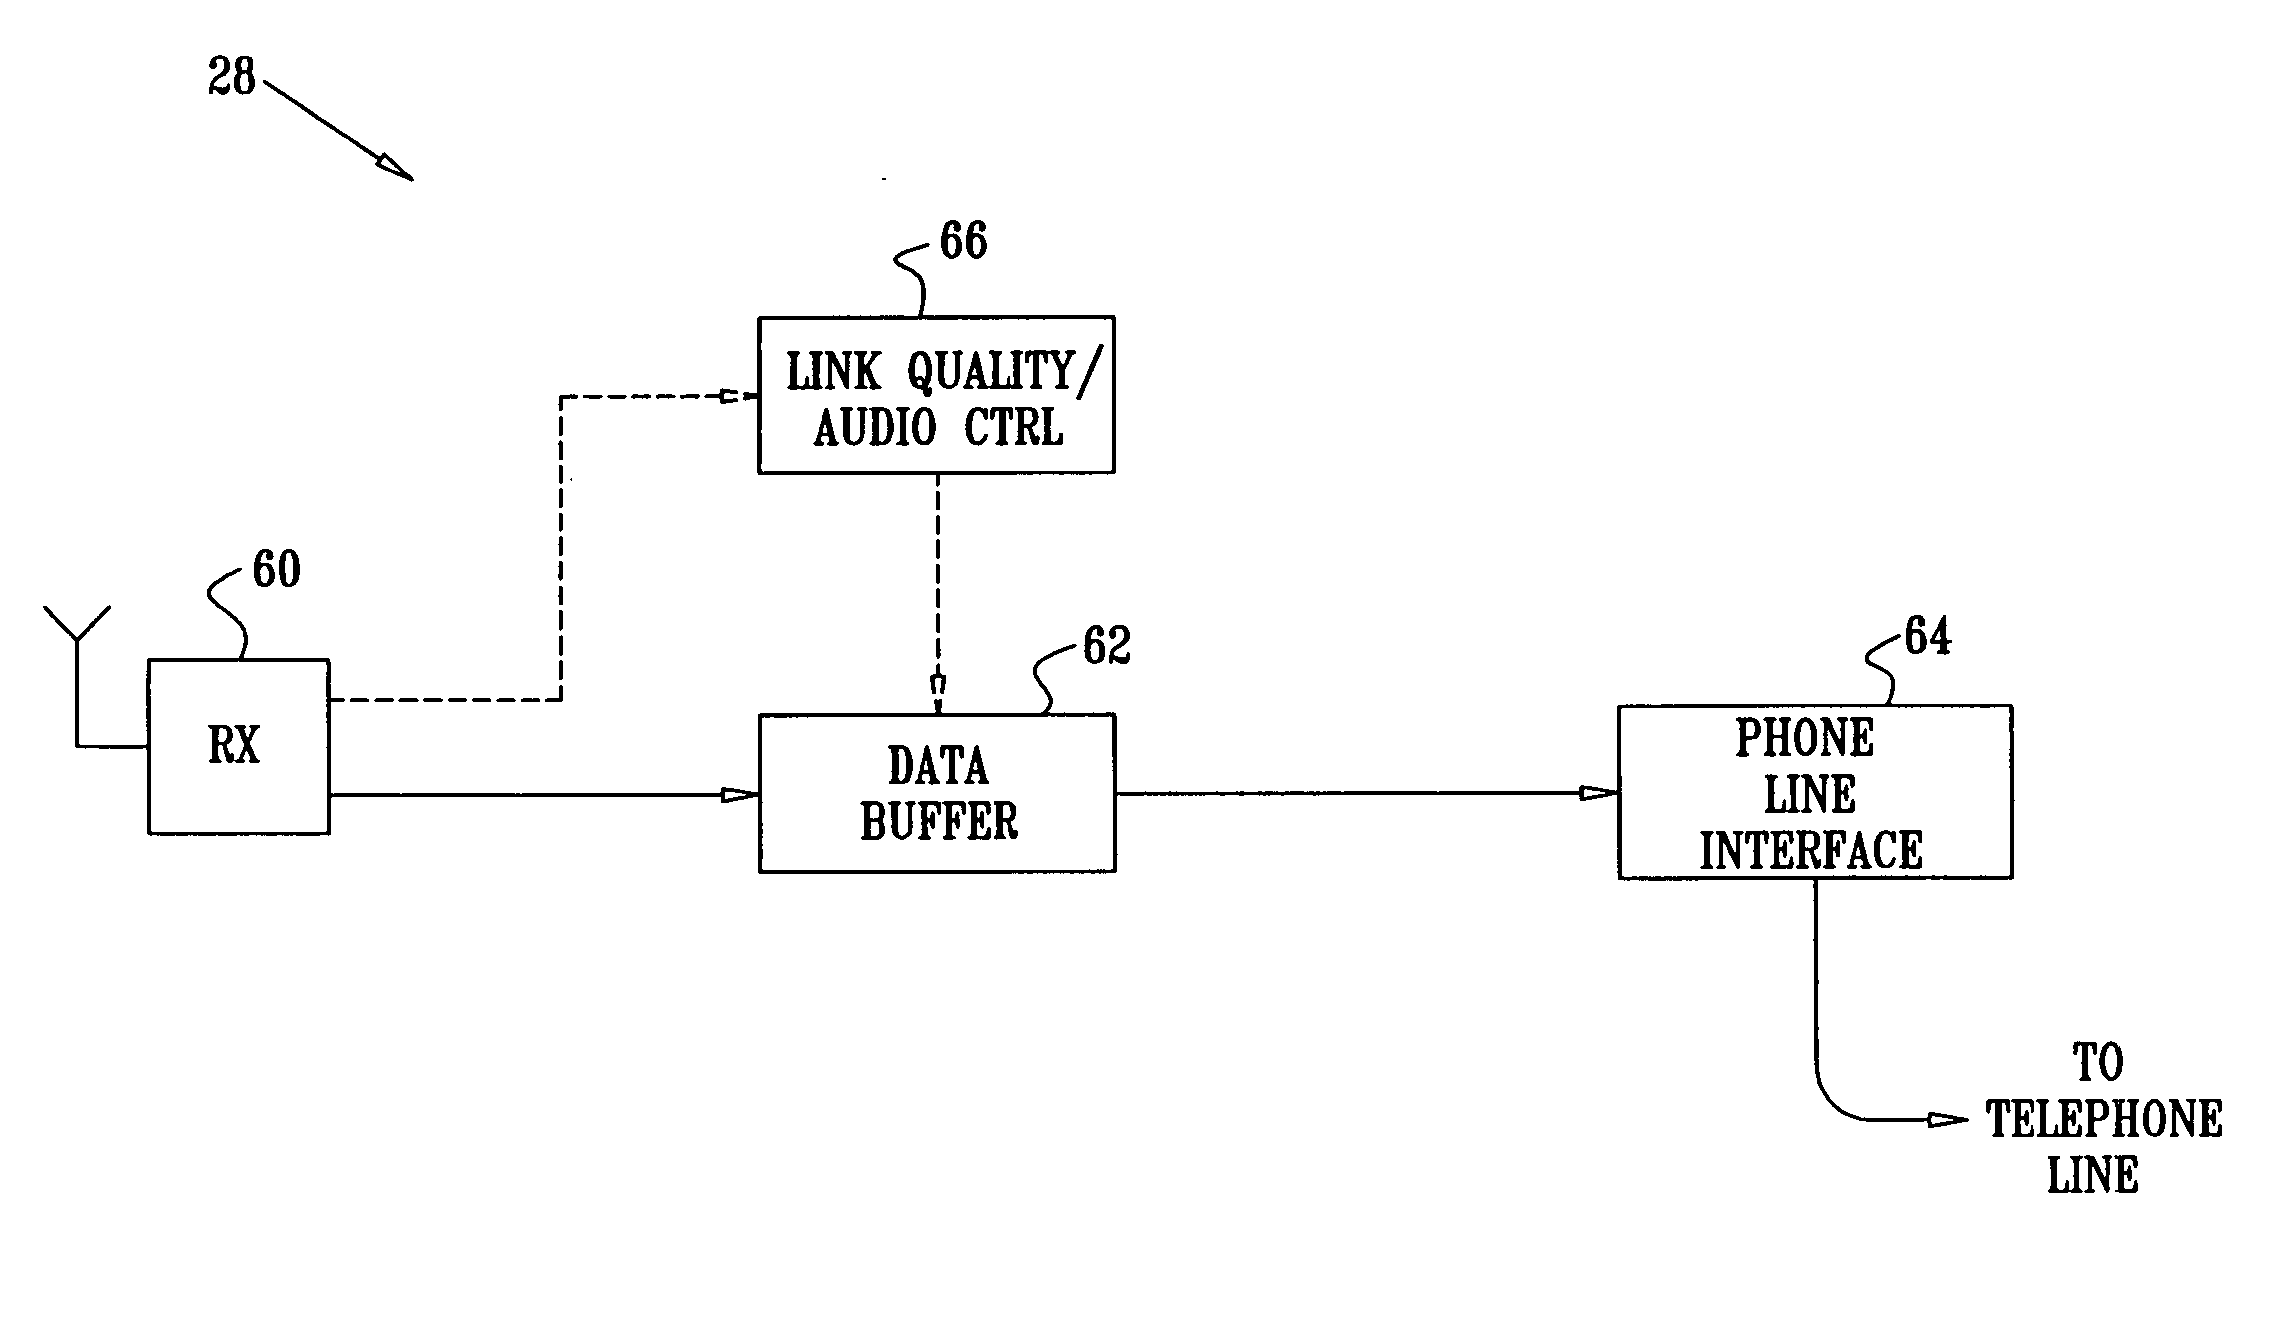 Multiplex communication with slotted retransmission on demand